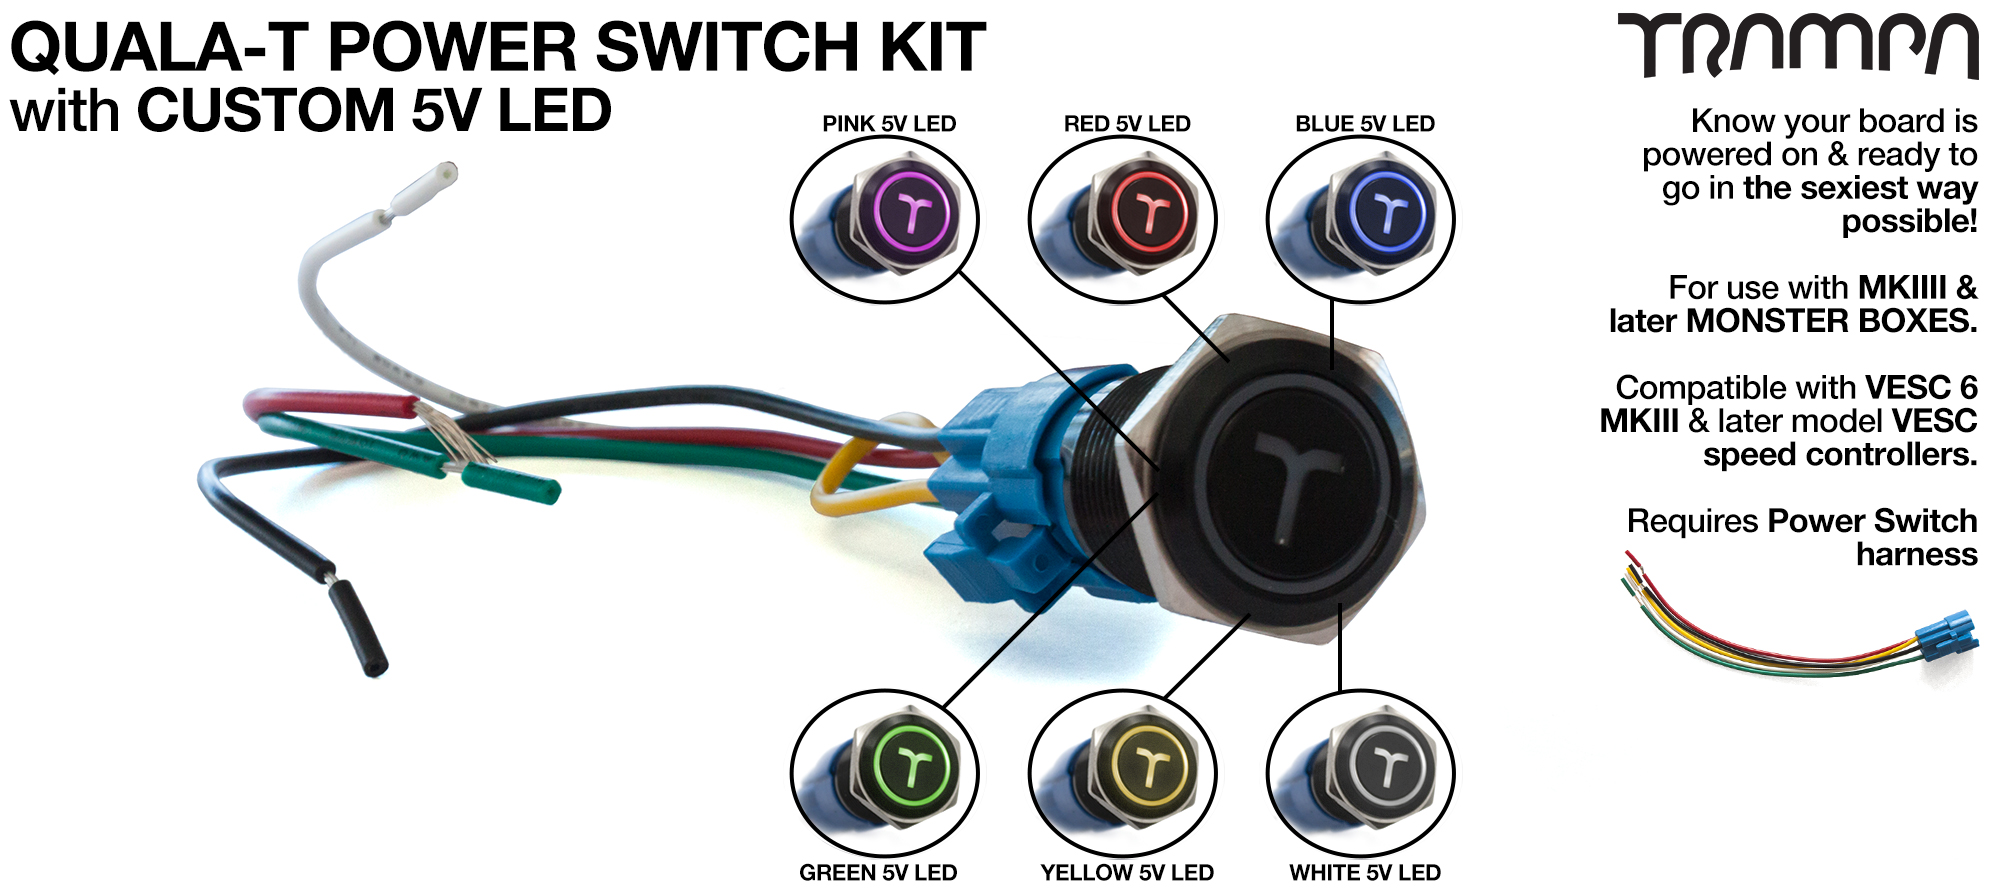 QUALA-T Power Switch Kit - Power Switch, 16mm Fixing Nut & Cable Harness. Blue, Red or White 5v LED - Solo